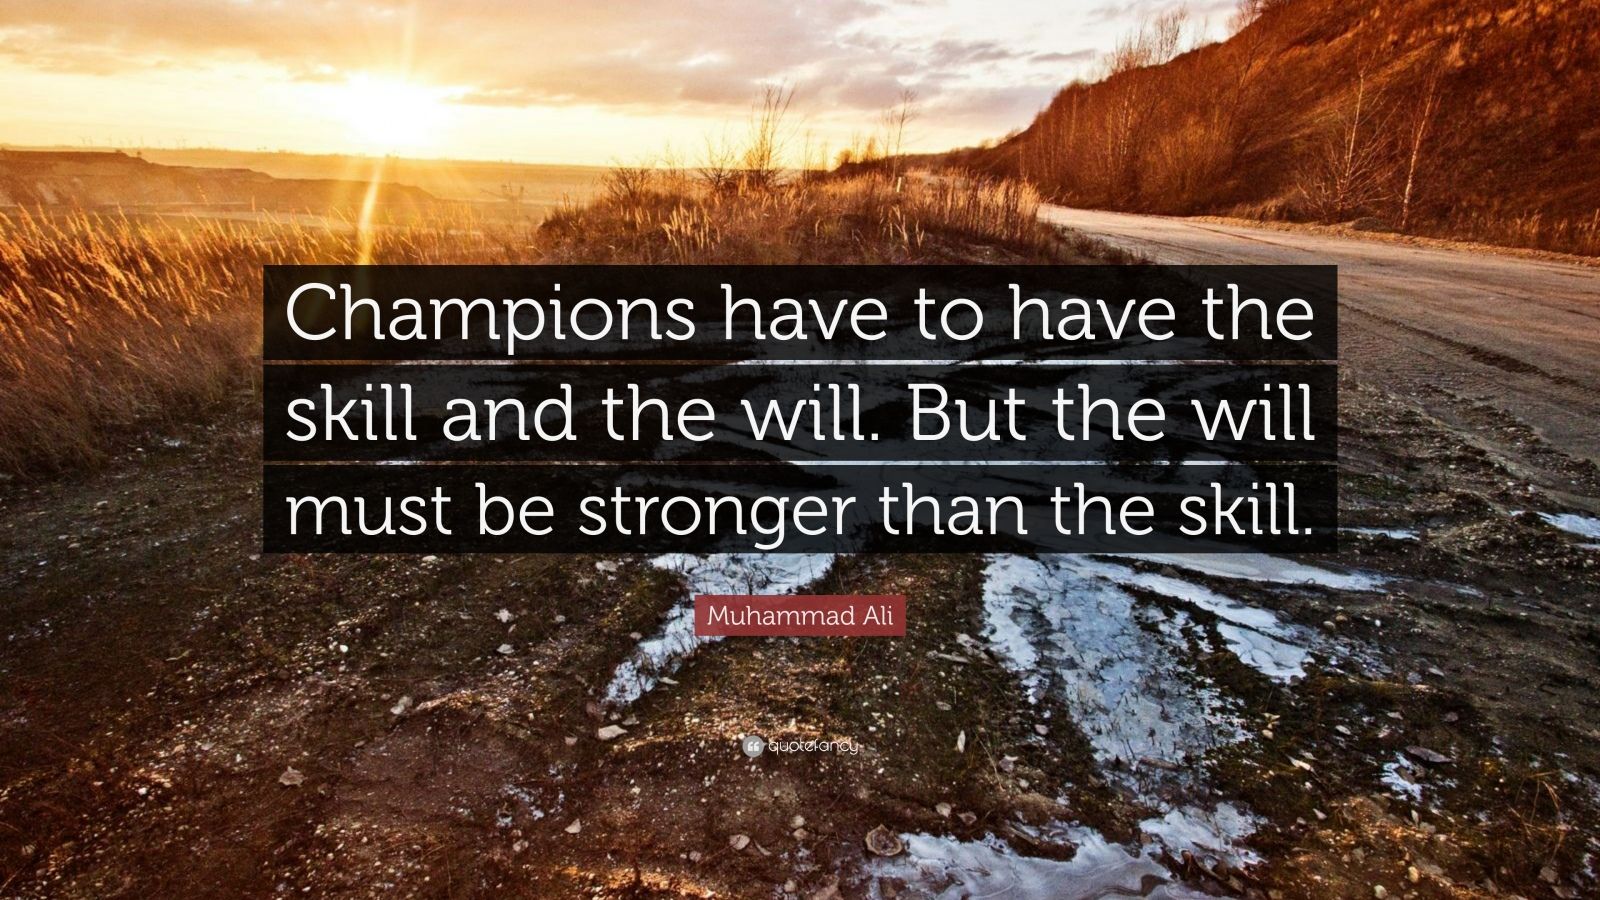 Muhammad Ali Quote: “Champions have to have the skill and the will. But